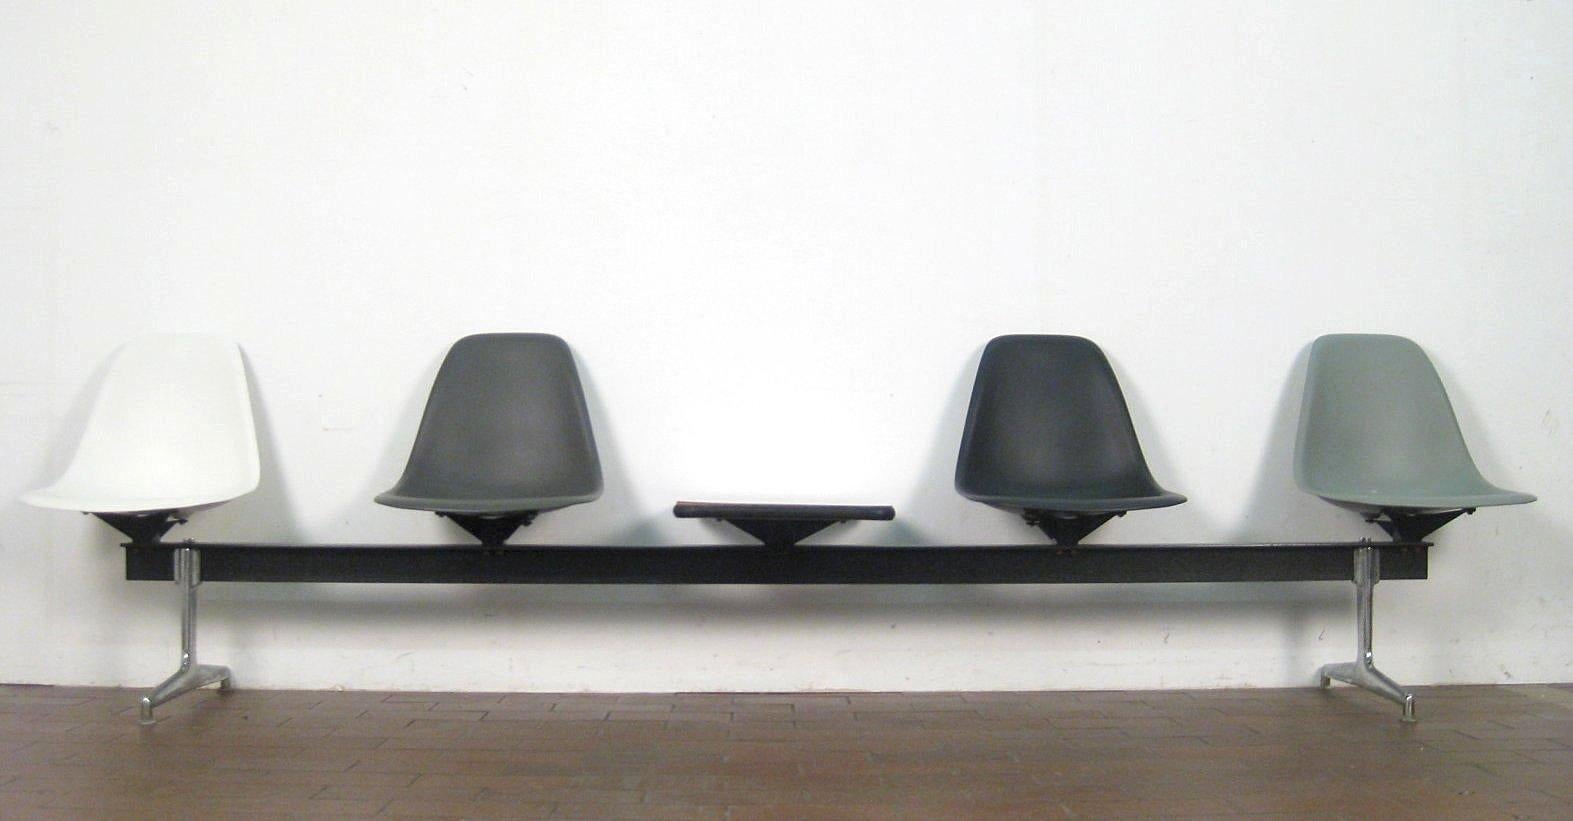 Rare tandem shell seating designed by Charles & Ray Eames and produced by Vitra of Switzerland. This piece features four different colored plastic seats and a table mounted on shock mounts to a black painted steel T-bar raised on aluminum legs.